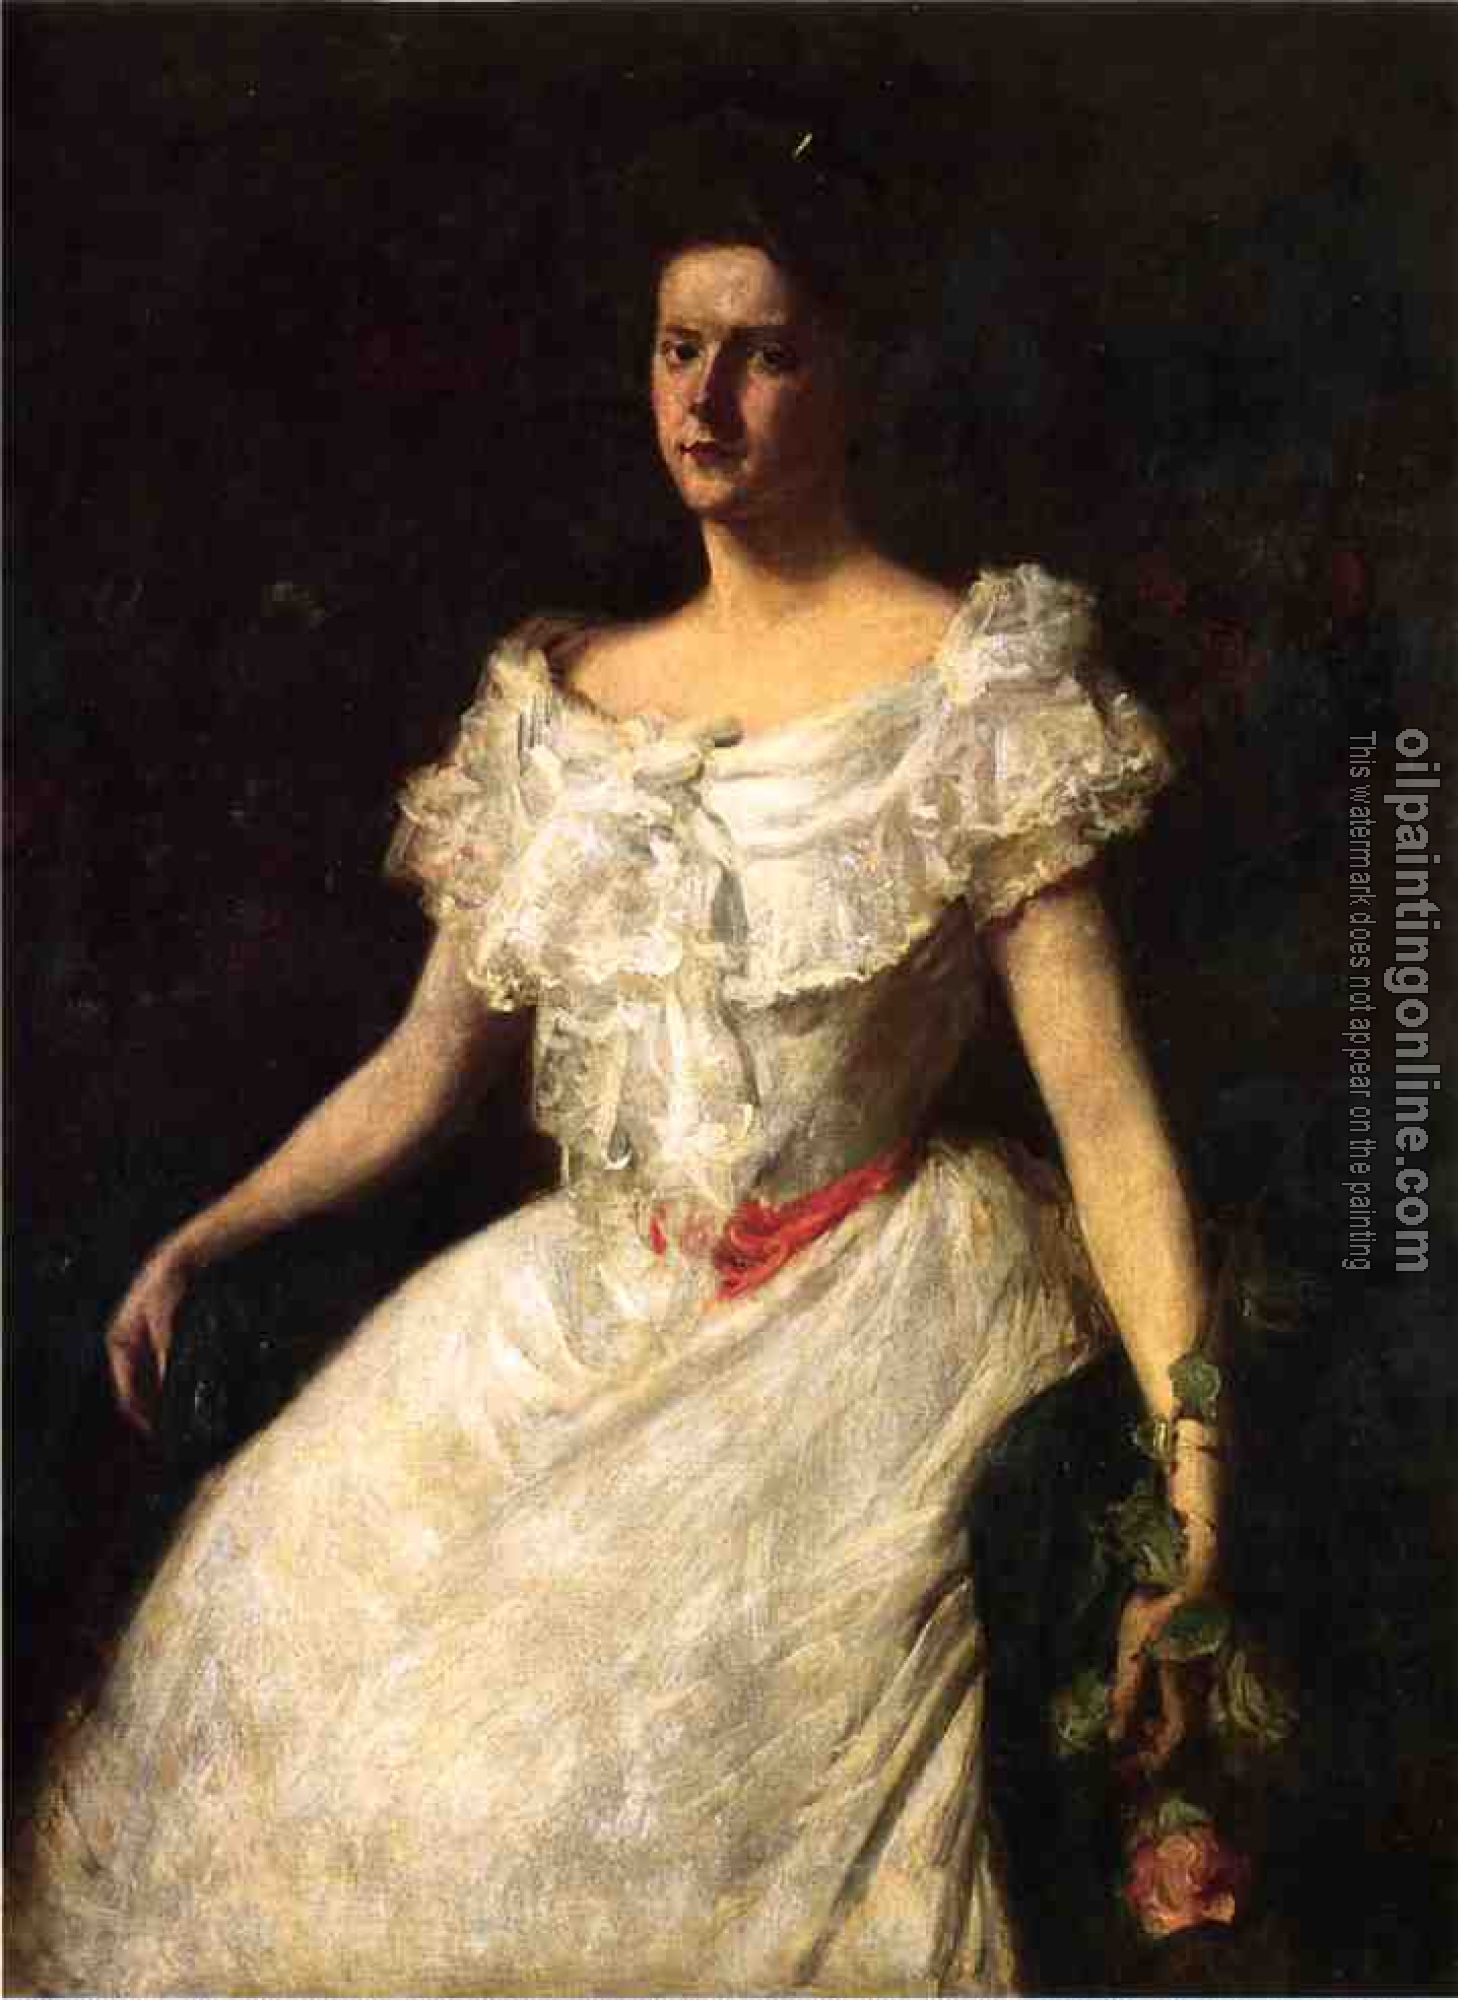 Chase, William Merritt - Portrait of a Lady with a Rose